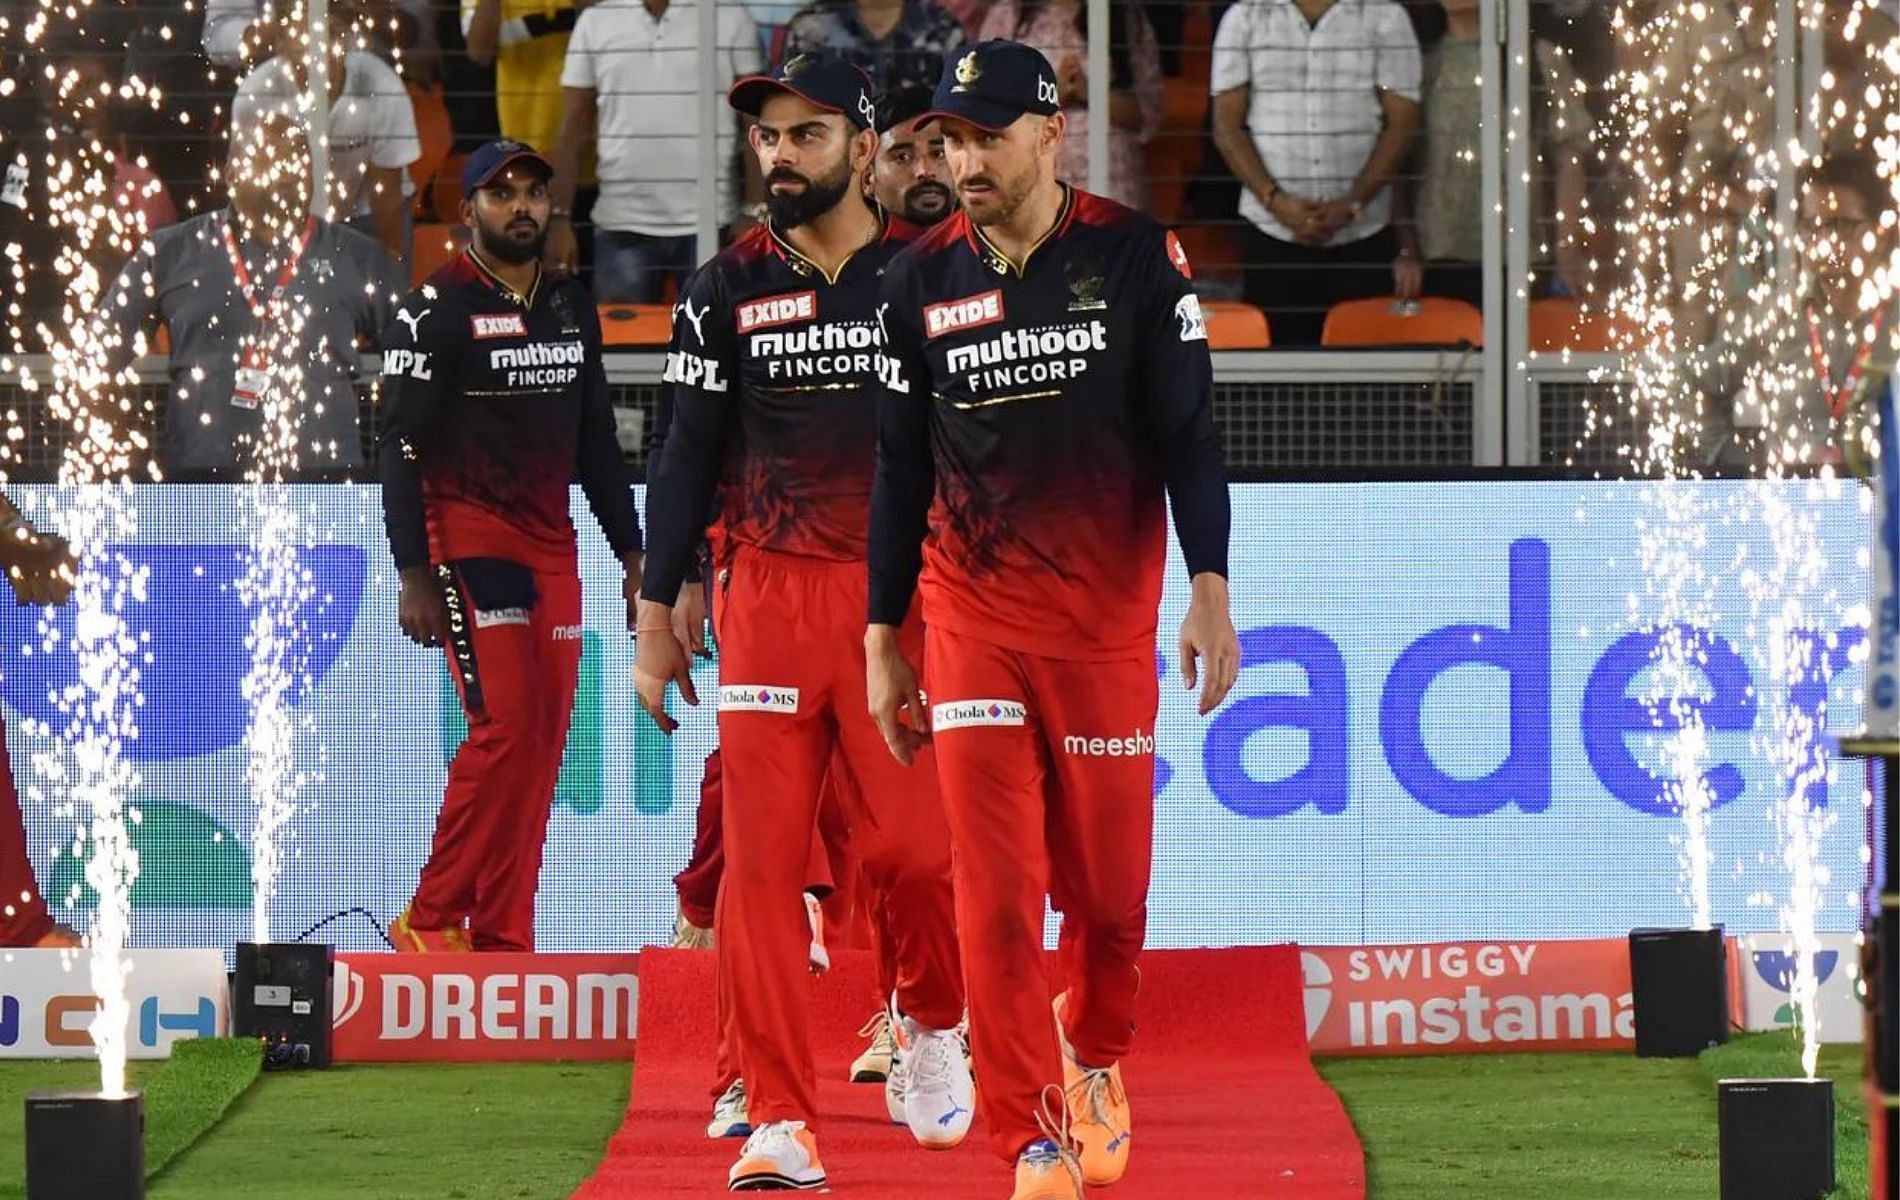 RCB lost to RR by 7 wickets on Friday (Pic: IPLT20.com)